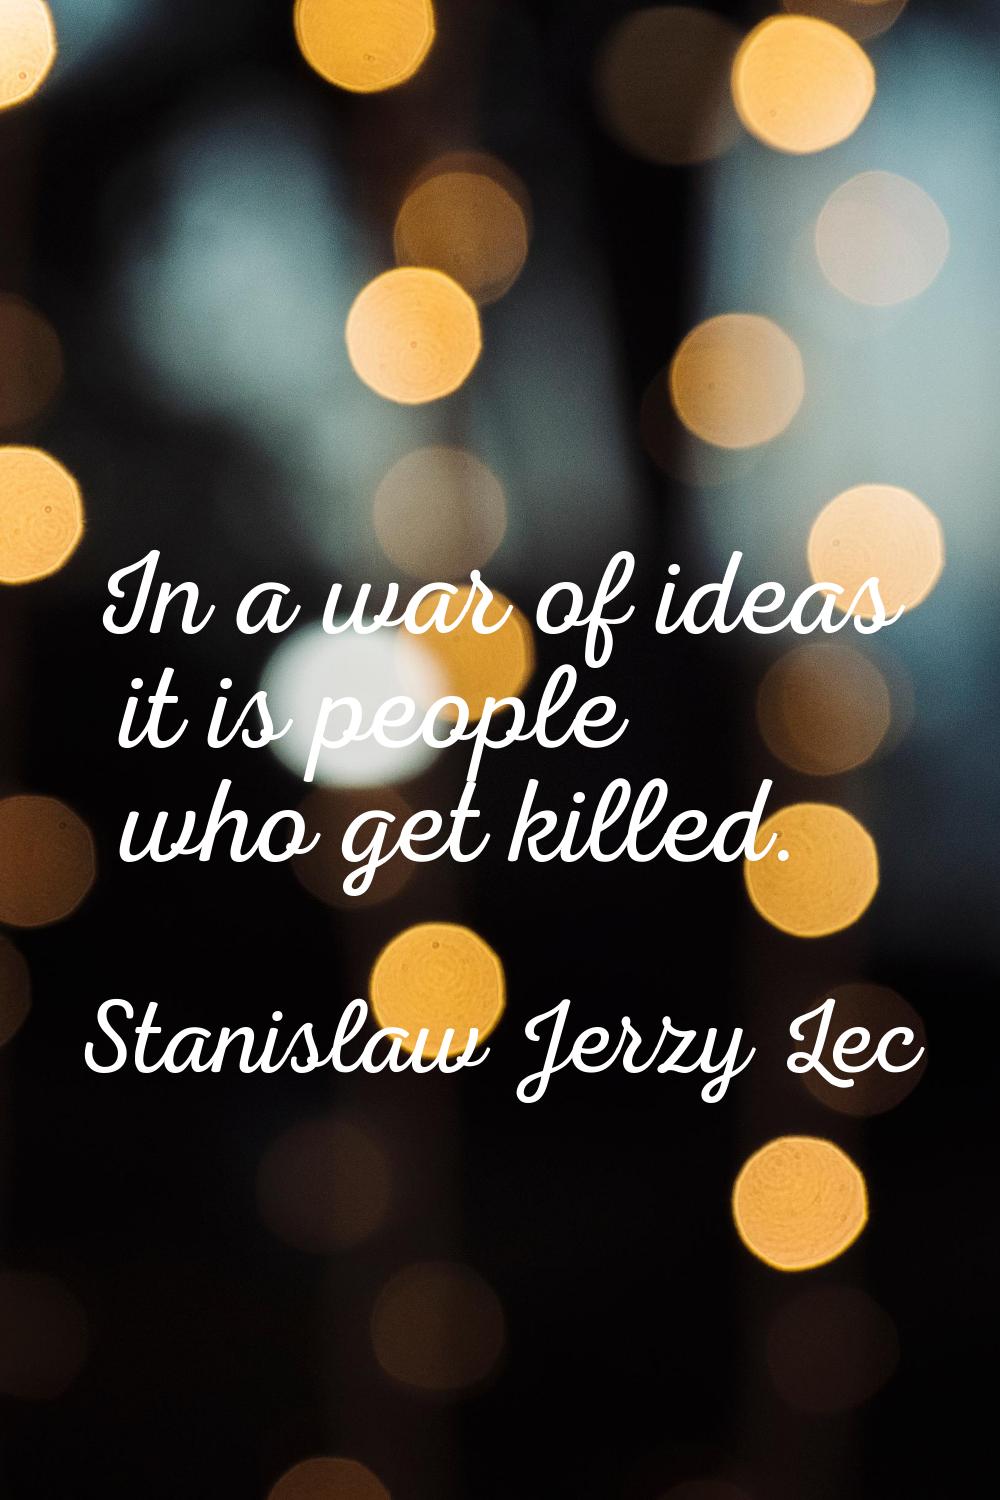 In a war of ideas it is people who get killed.